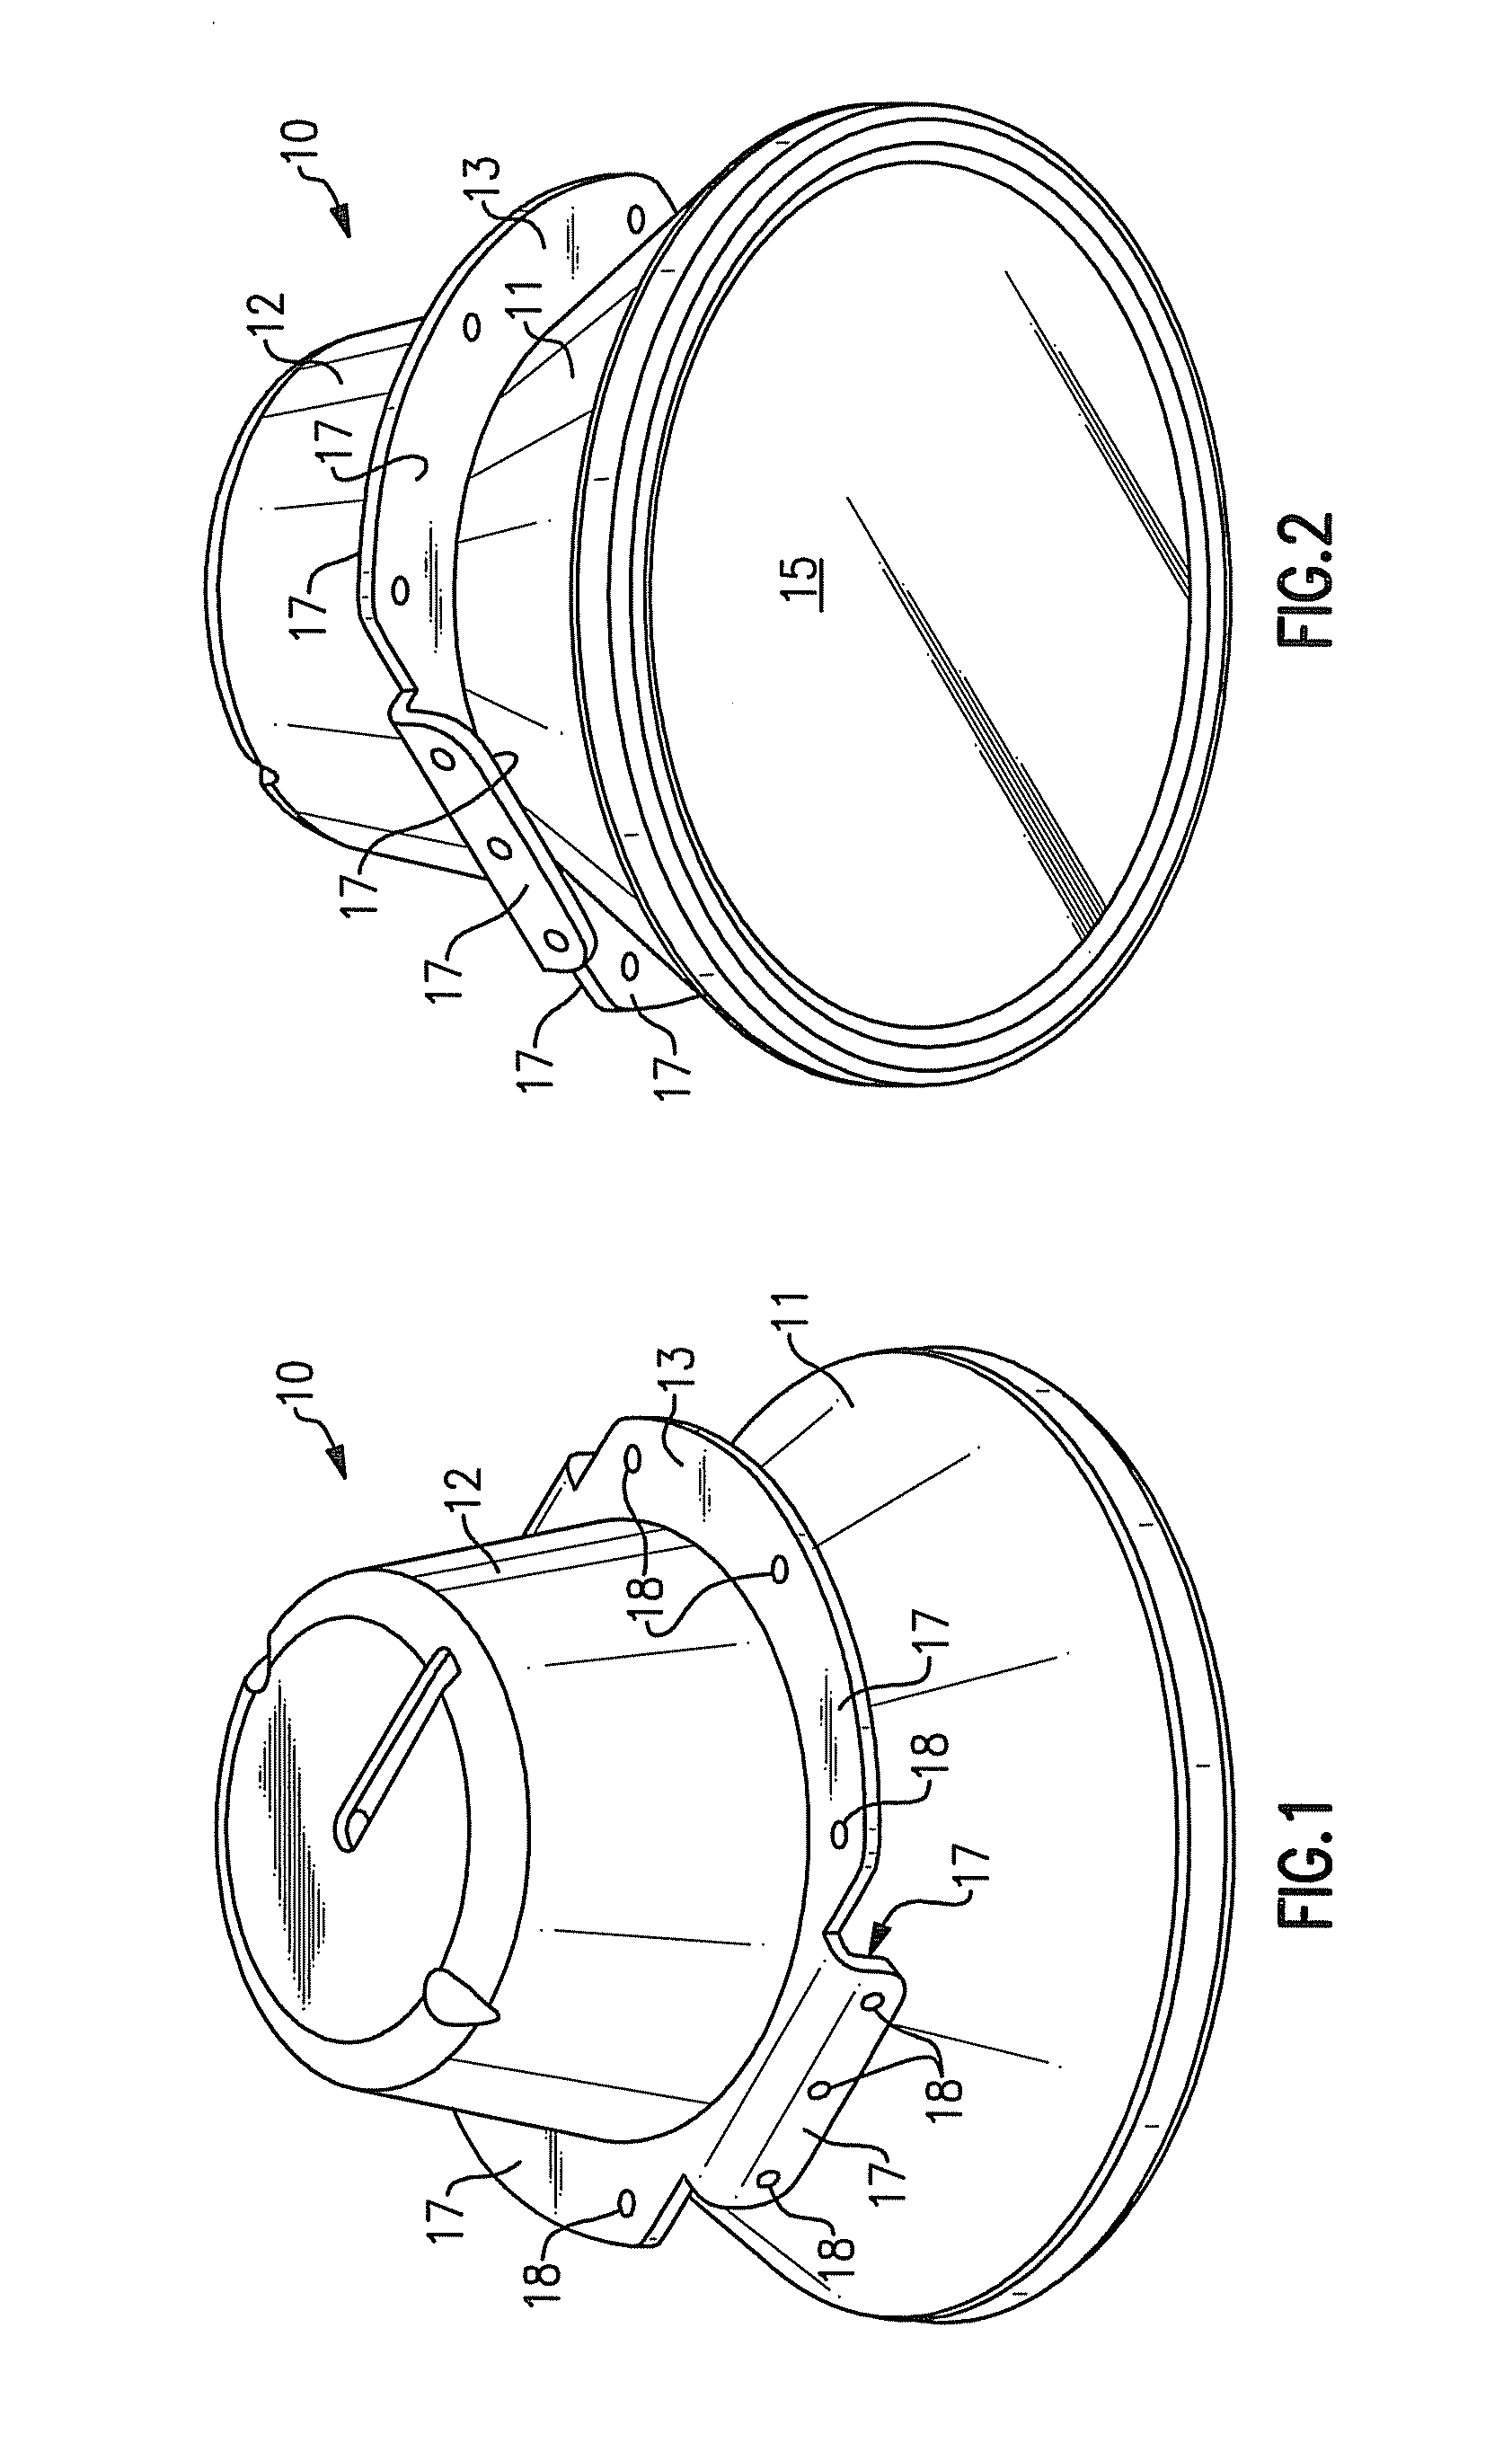 Light engines for lighting devices